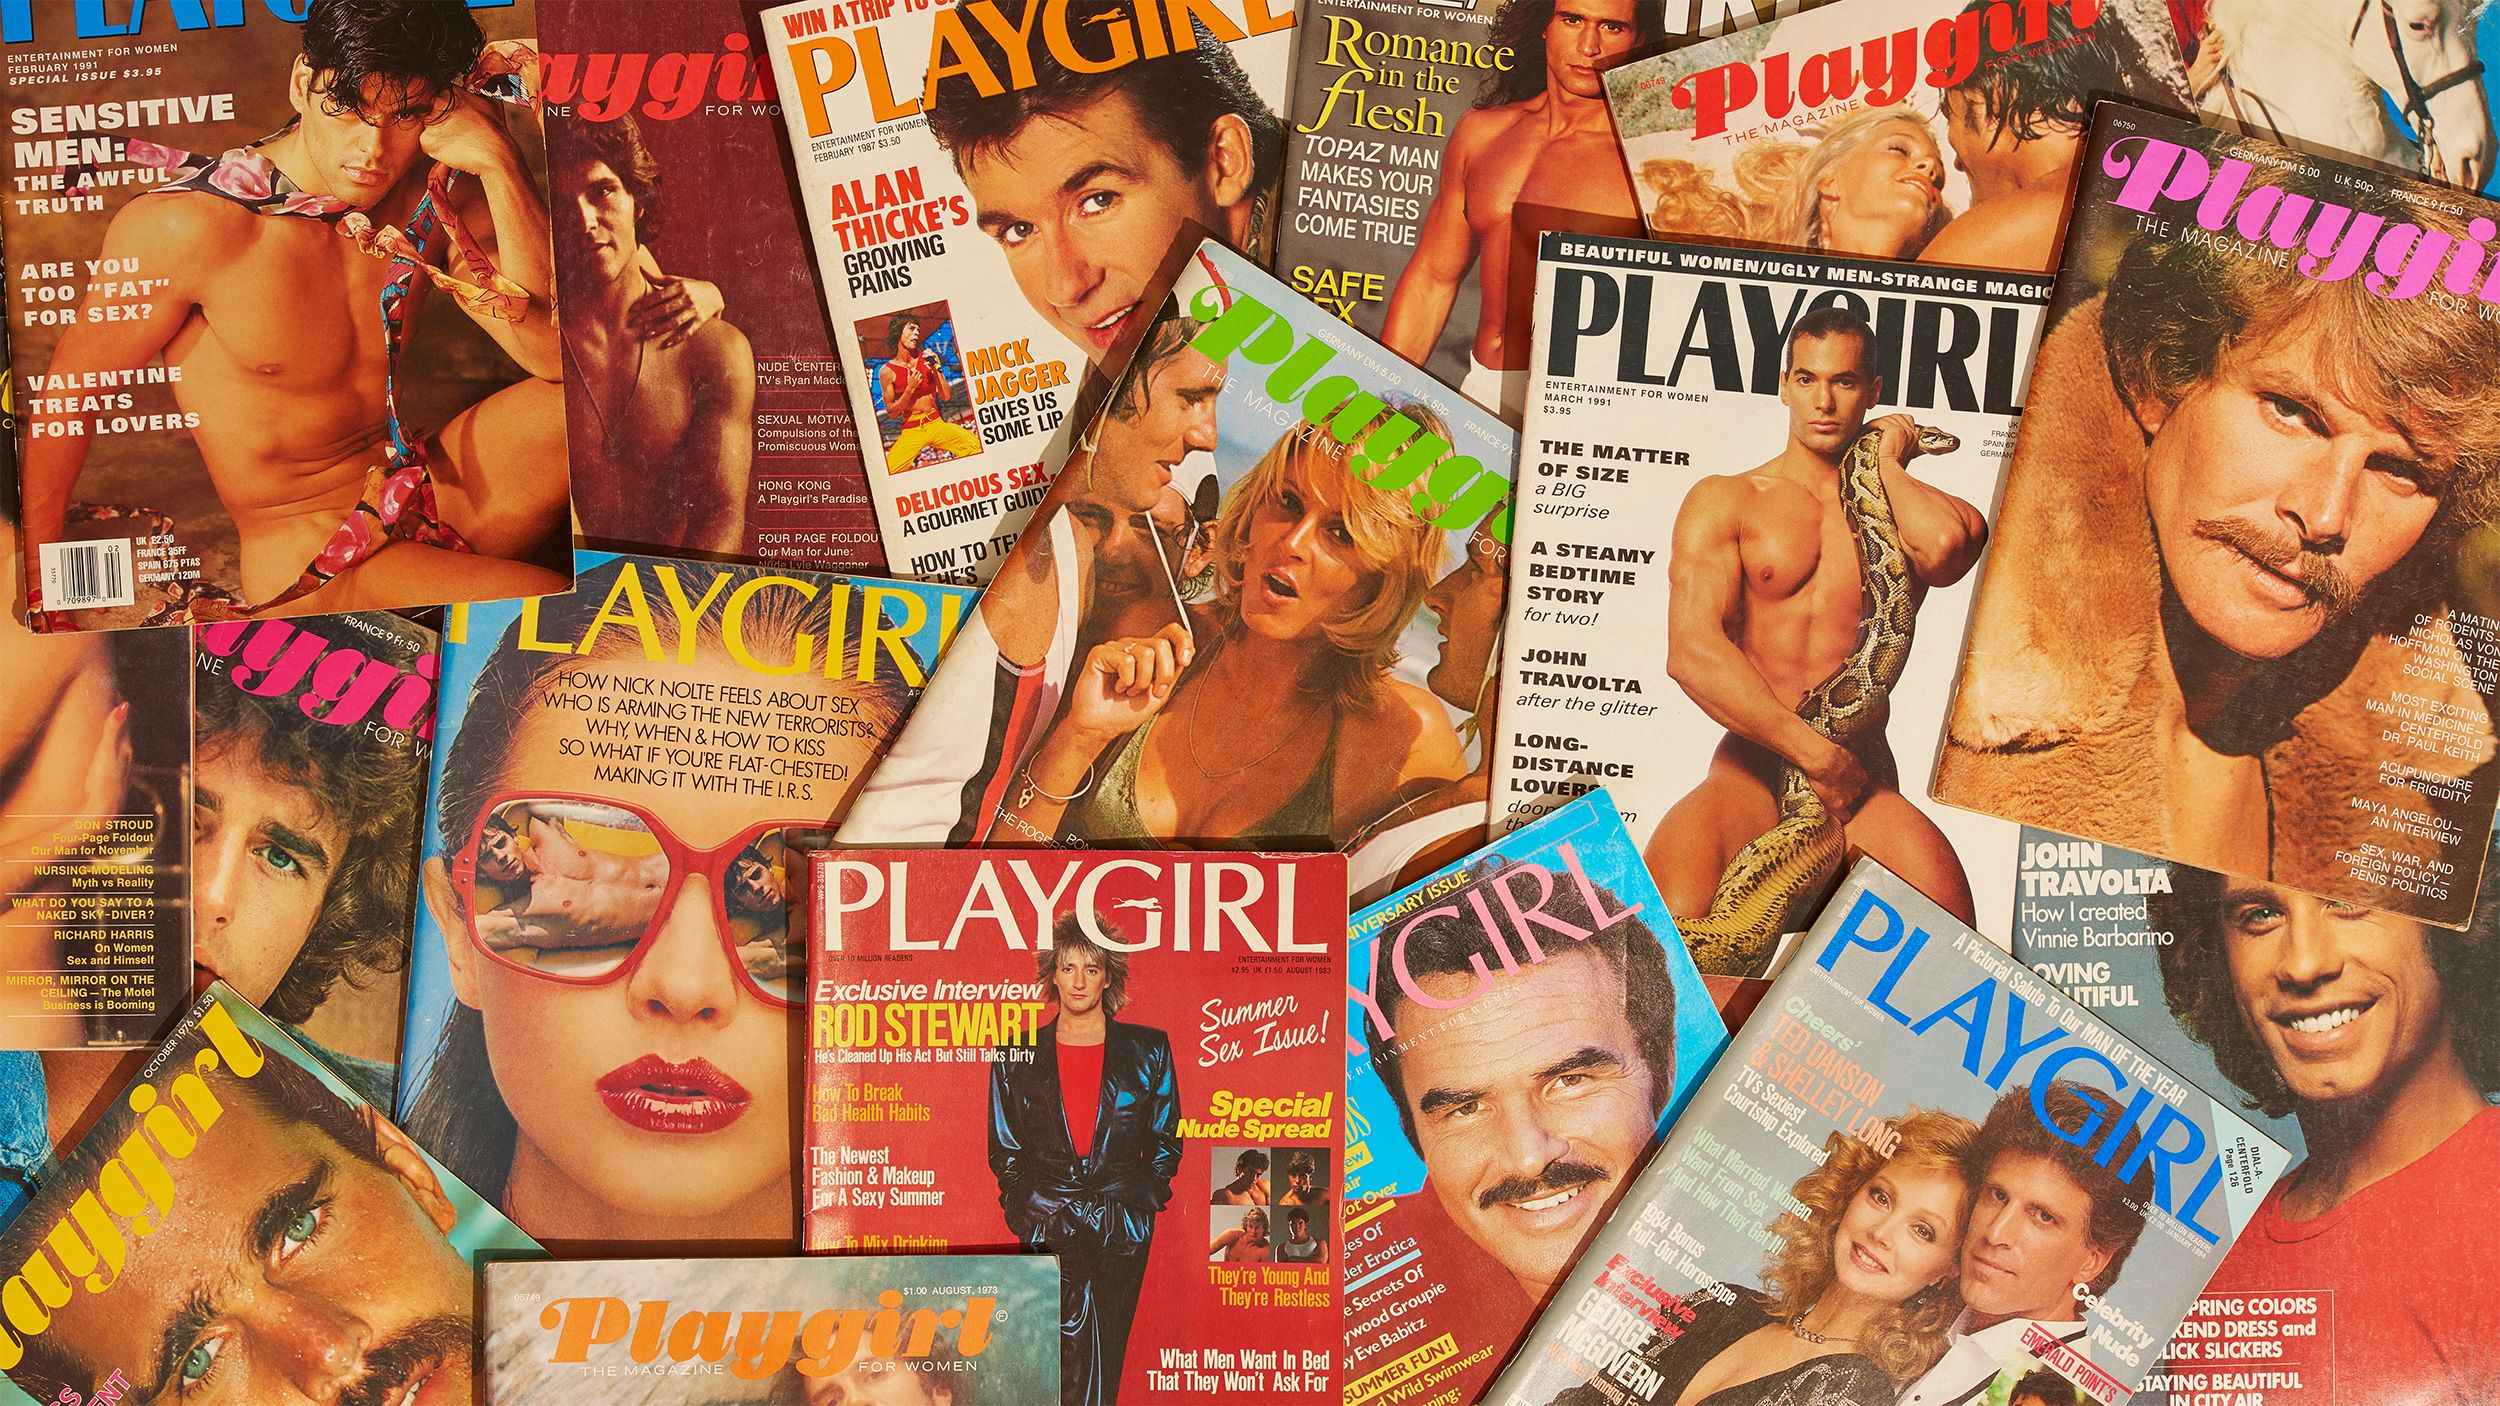 1970s Asian Porn Magazines - History of Playgirl Magazine - How Playgirl Normalized Male Nudity